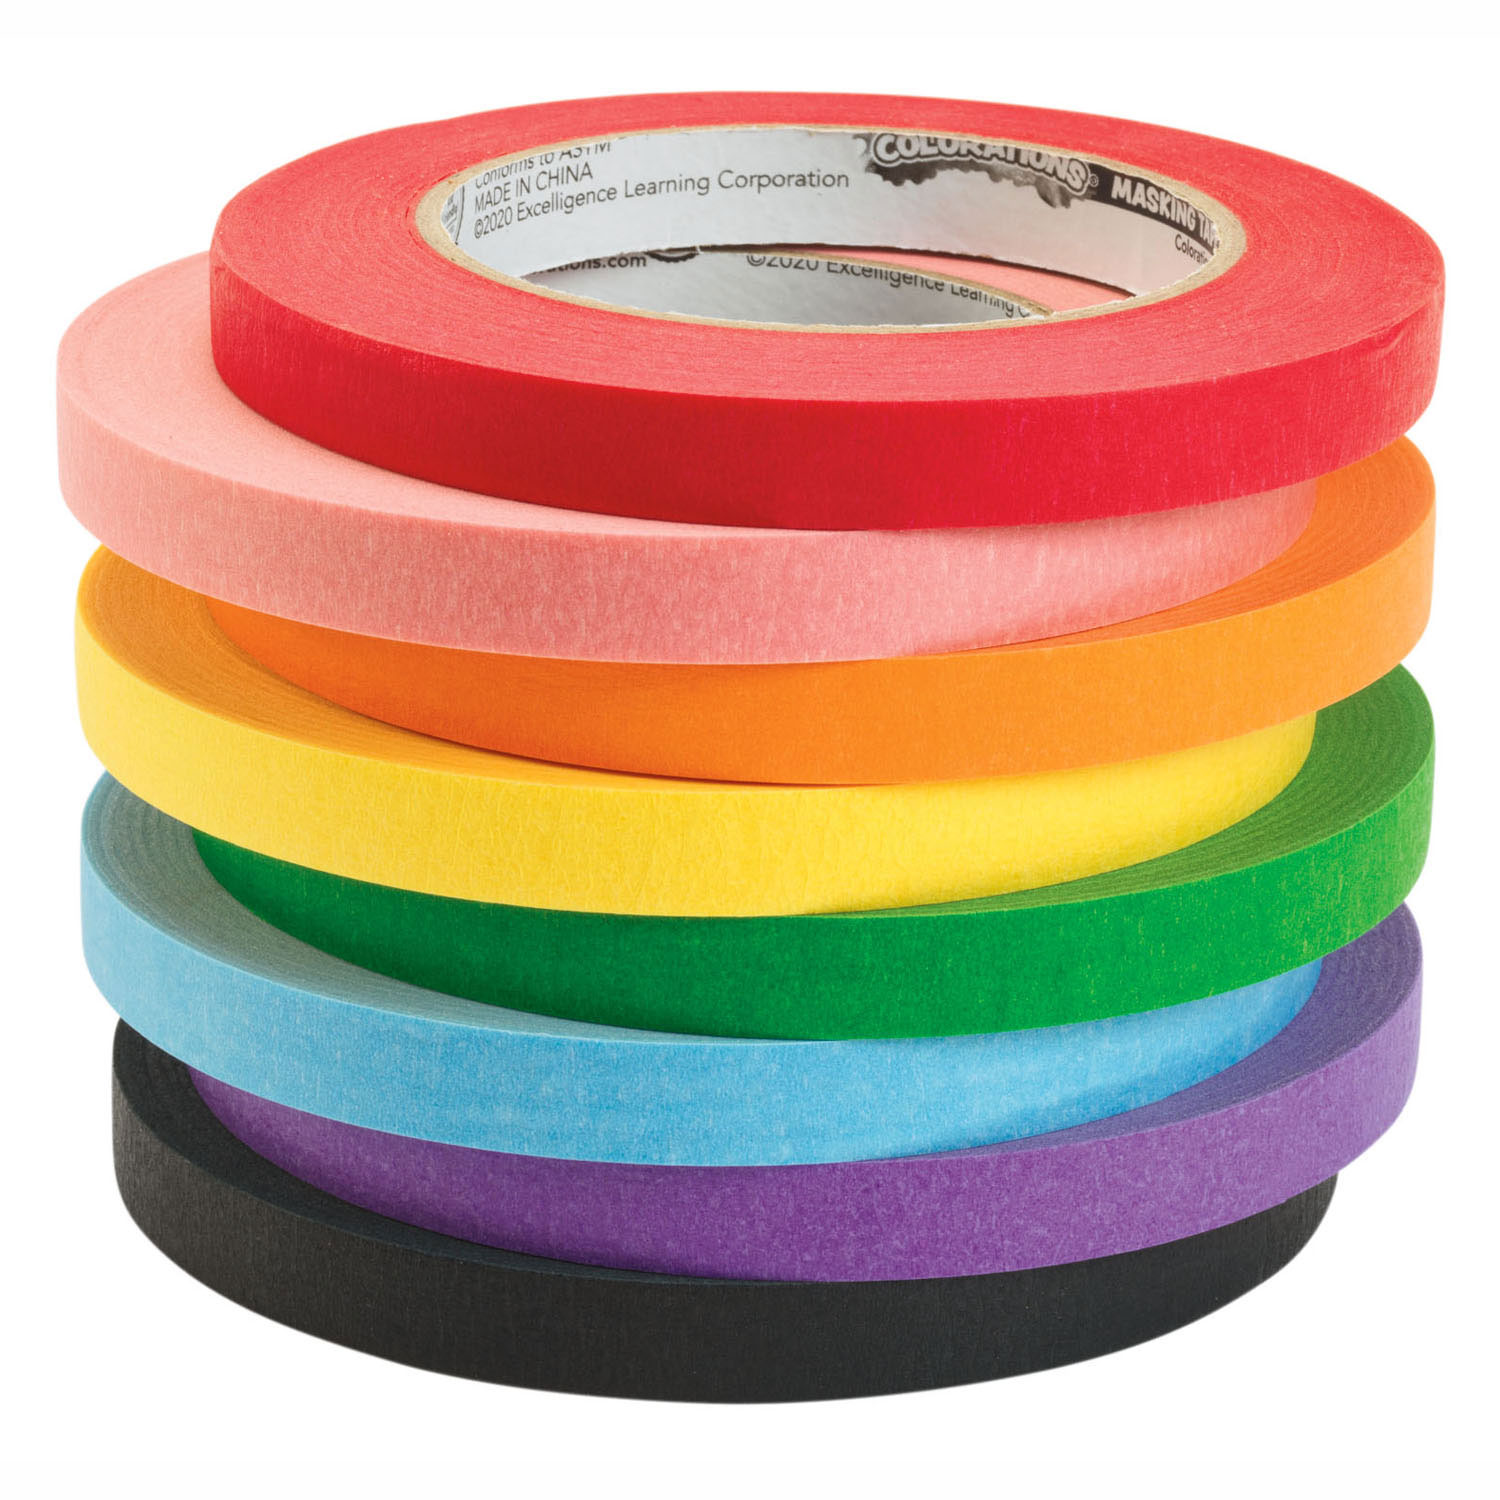 Colorations - Masking Tape 8 Colors - 55 meters per color